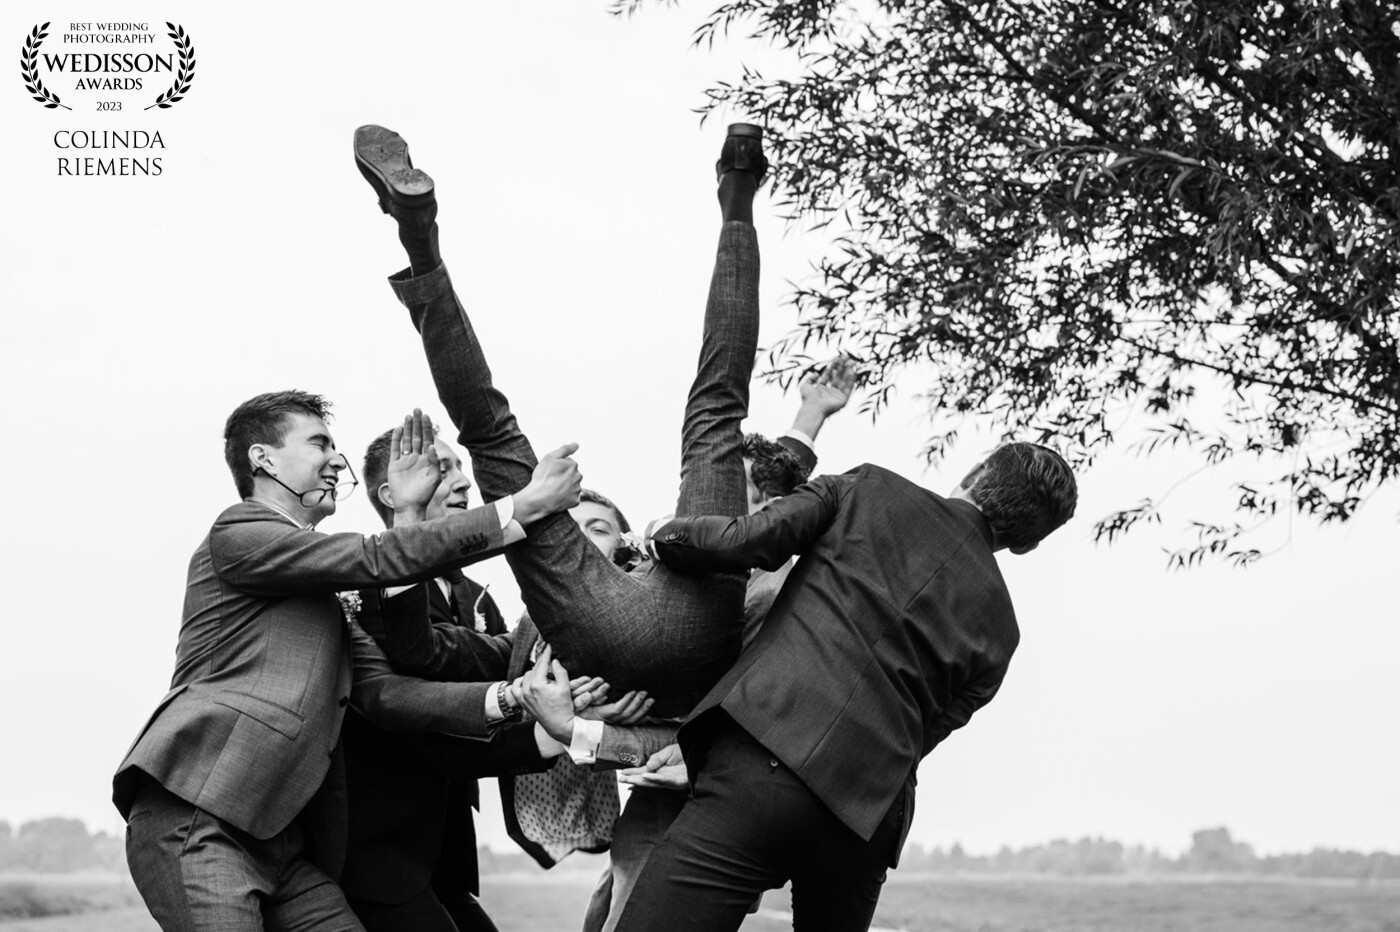 It is a great habit for groomsmen to lift the groom up. While the groom was falling back into their arms, the glasses of one of them were hit by the groom's hand so they didn't stay properly on where they belong!